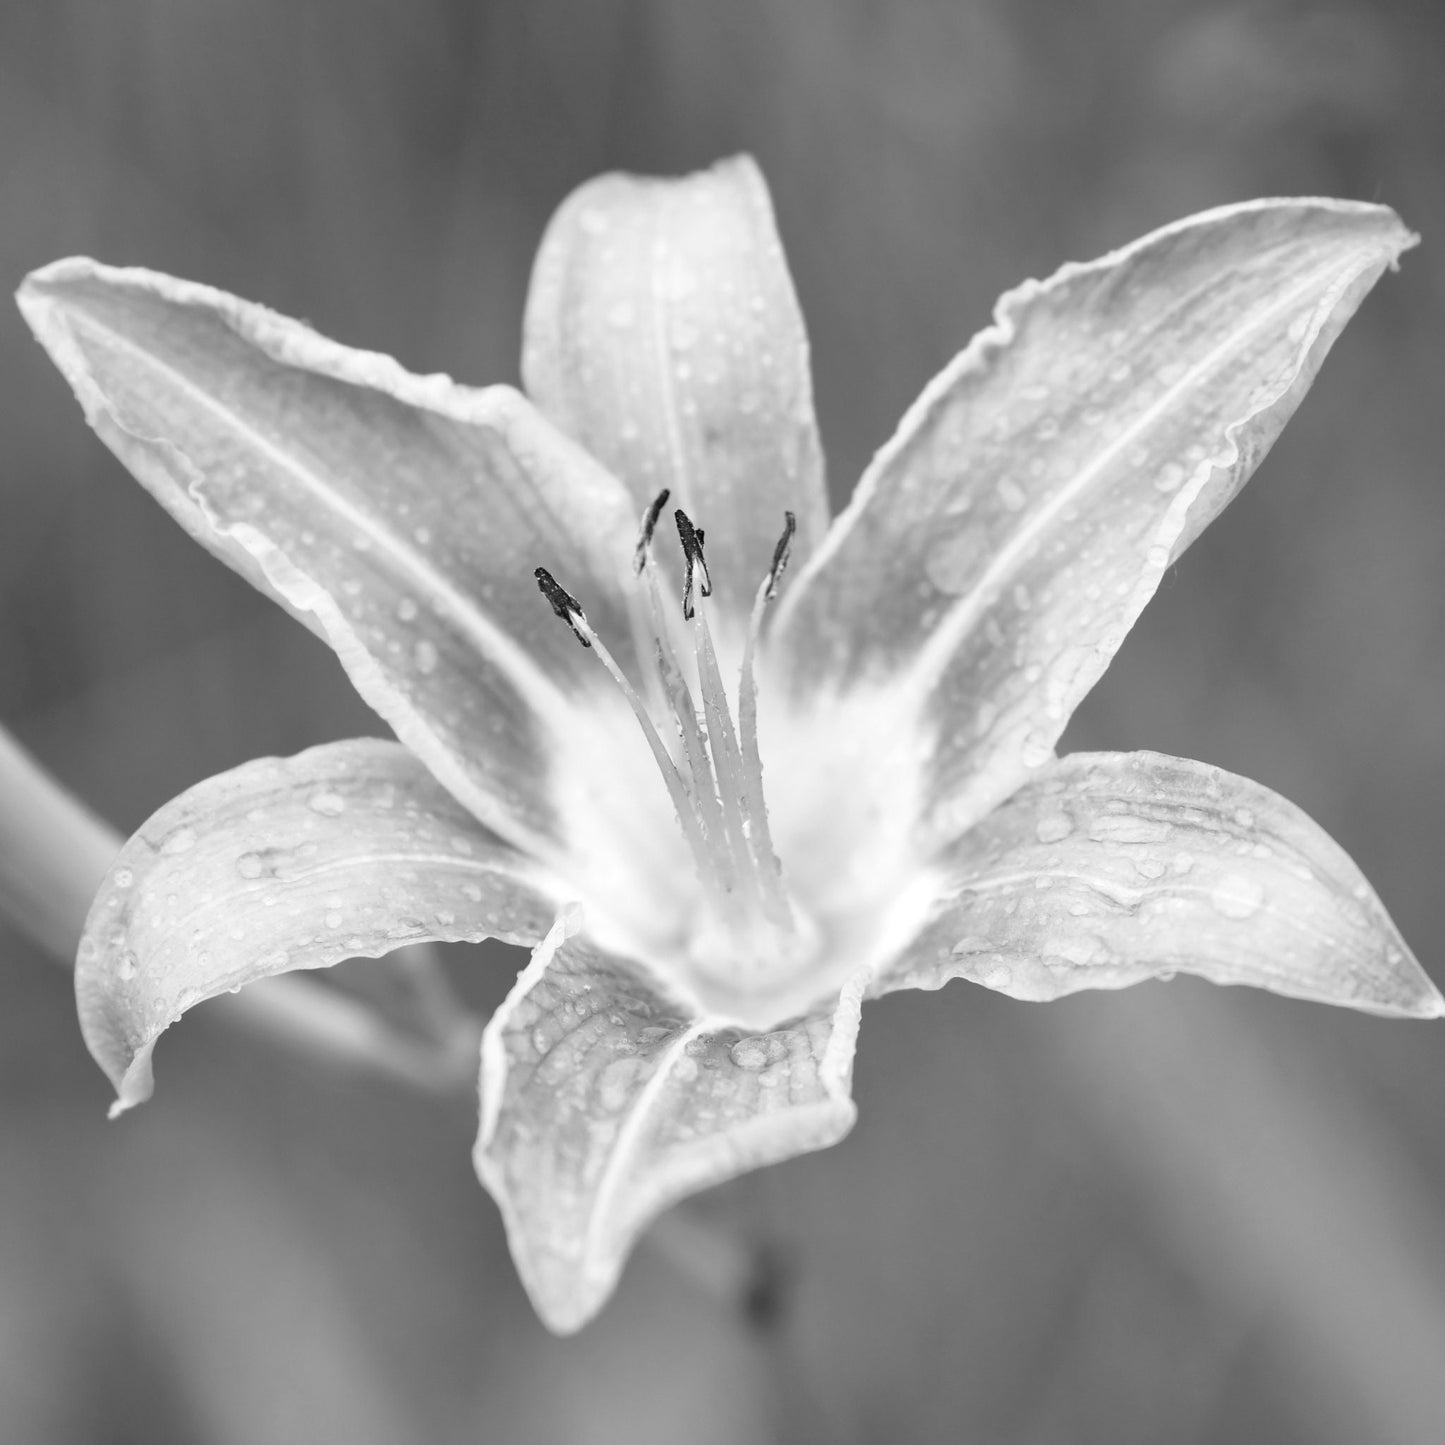 Orange Daylily print, day lily photo, flower photography, B&W art, black and white art, canvas picture, floral wall decor, 5x7 to 40x60"